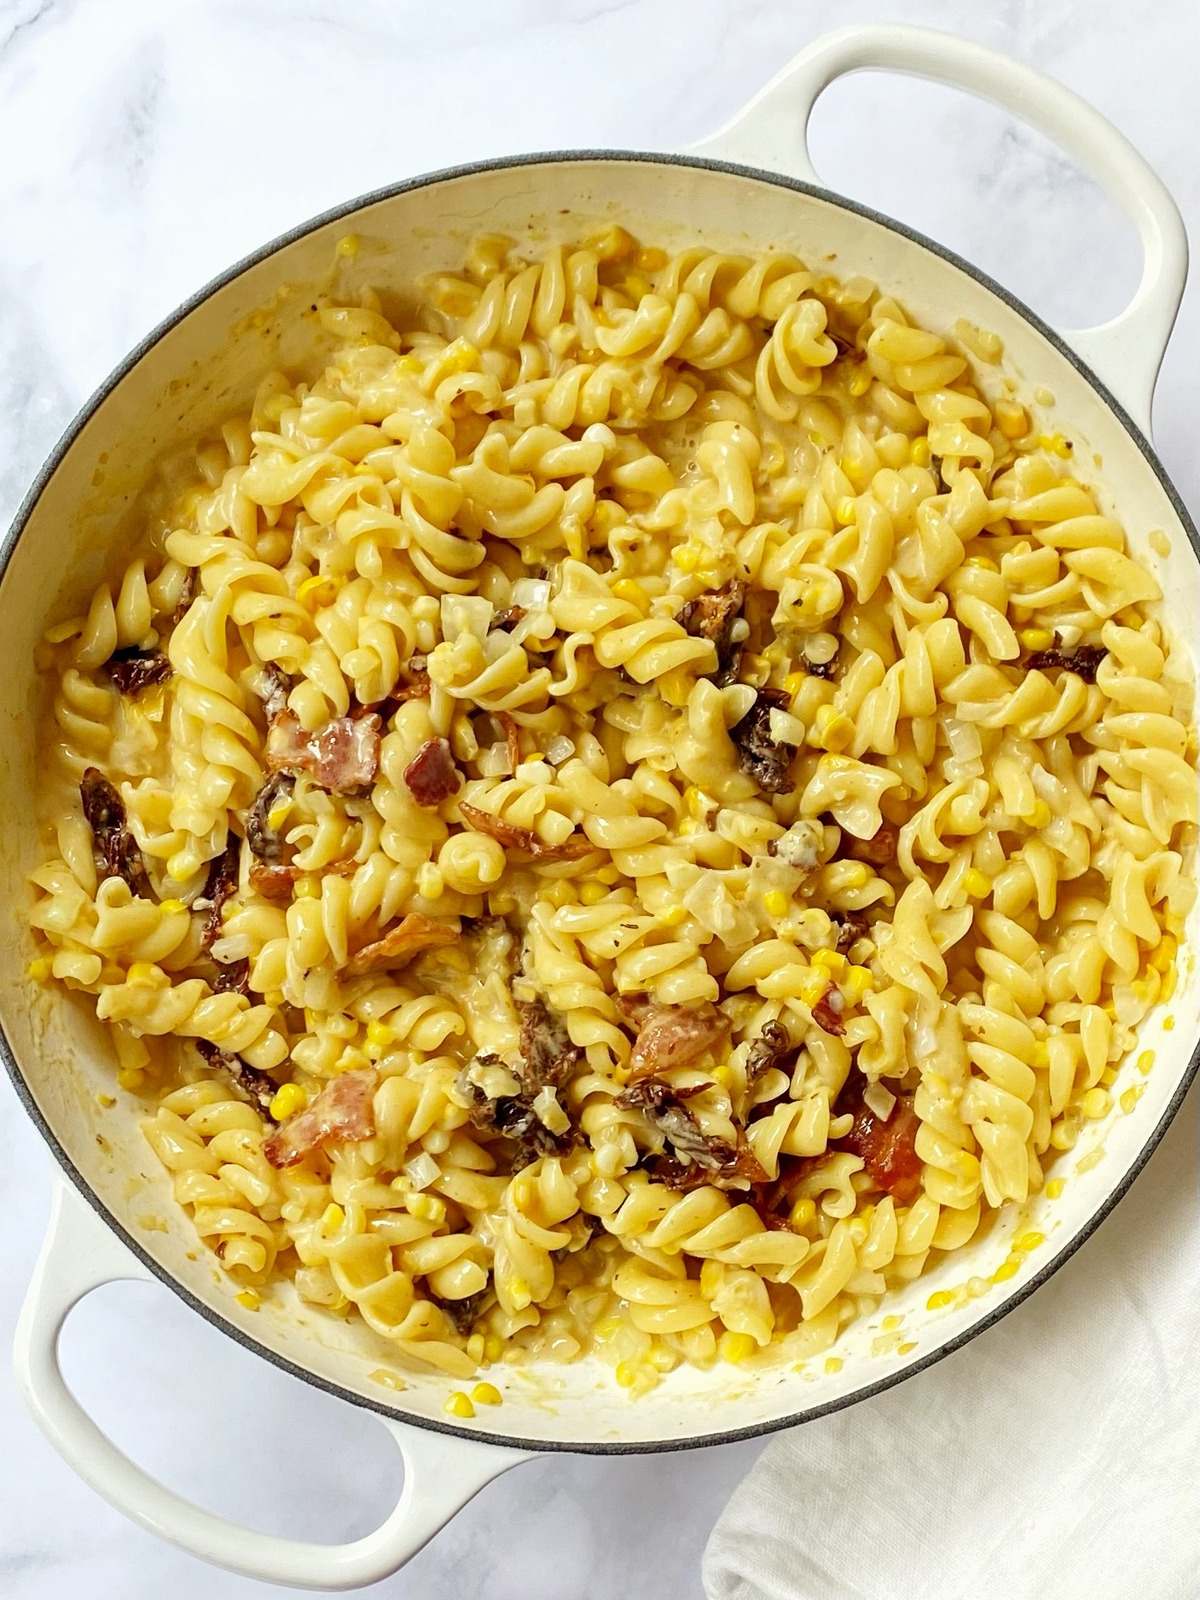 skillet of pasta, corn, bacon, and sun-dried tomatoes.